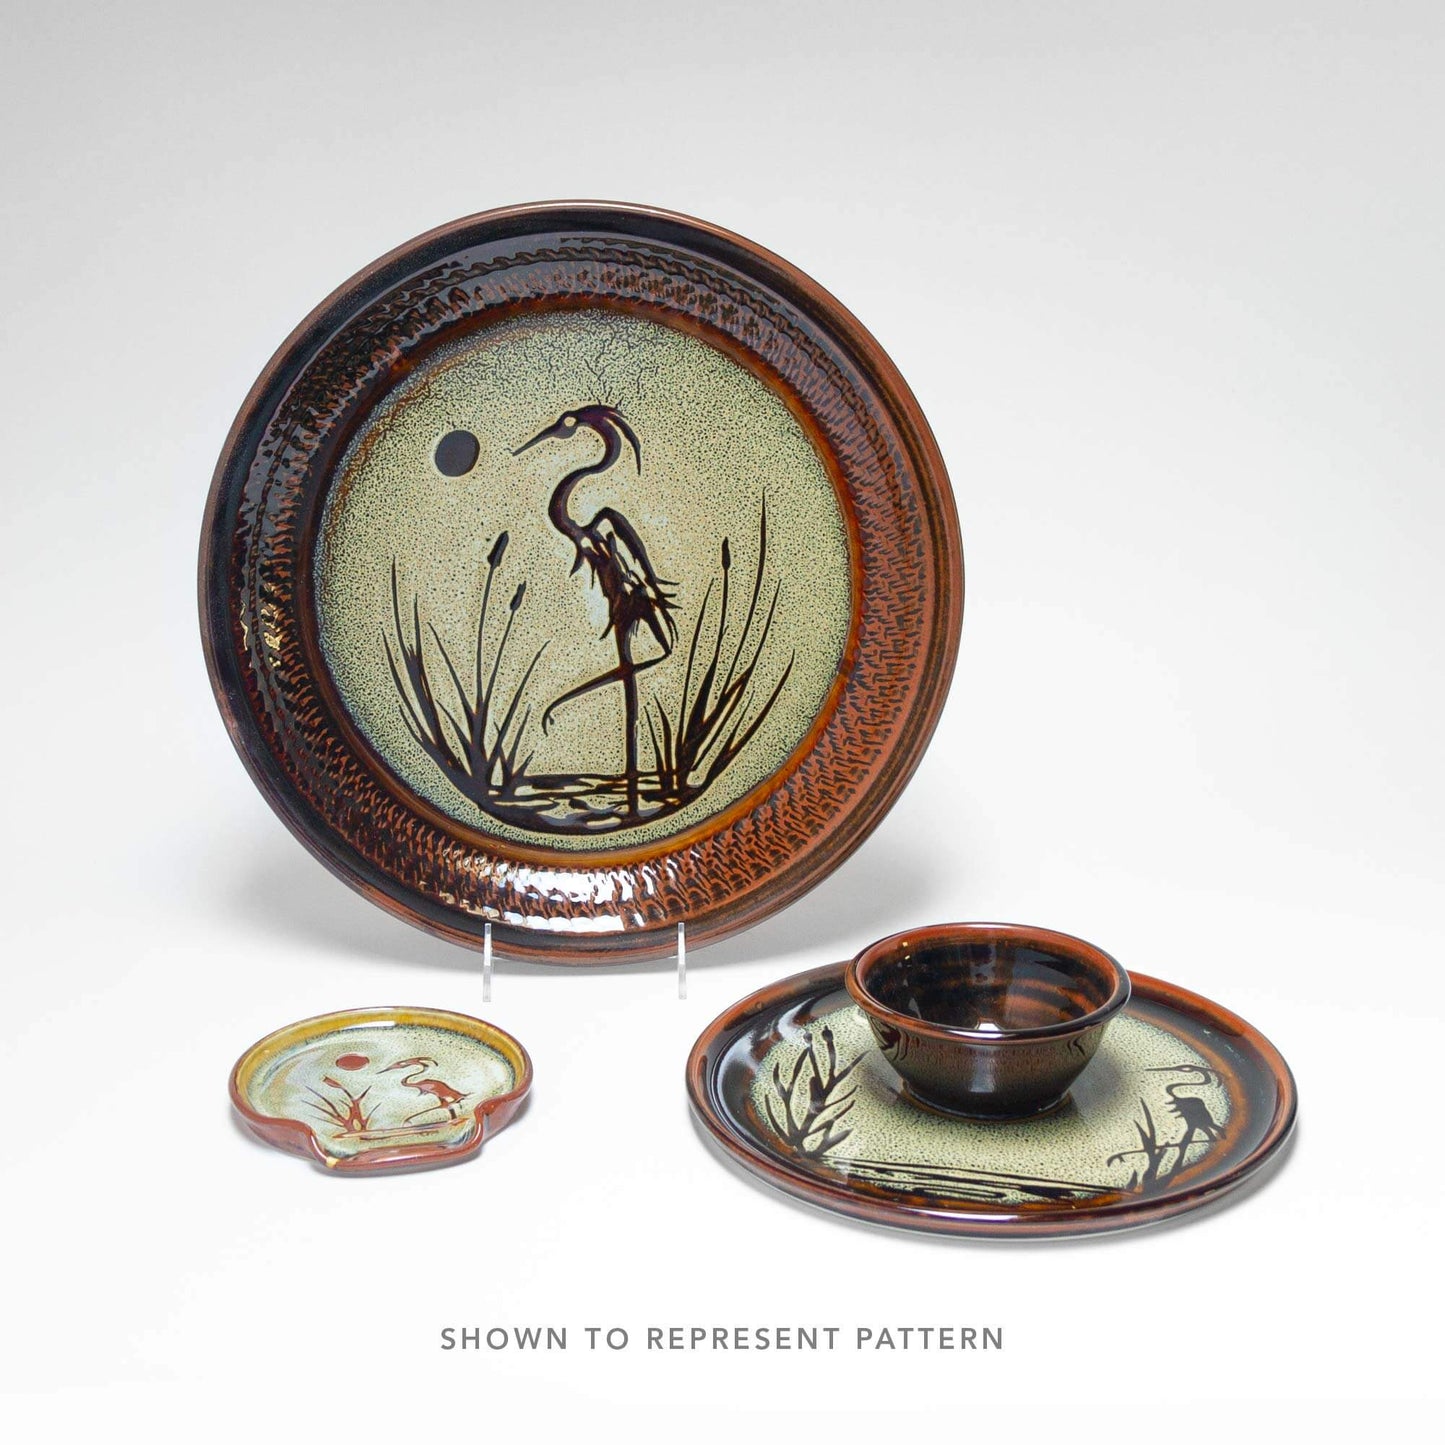 Handmade Pottery Appetizer Bowl in Hamada Heron pattern made by Georgetown Pottery in Maine